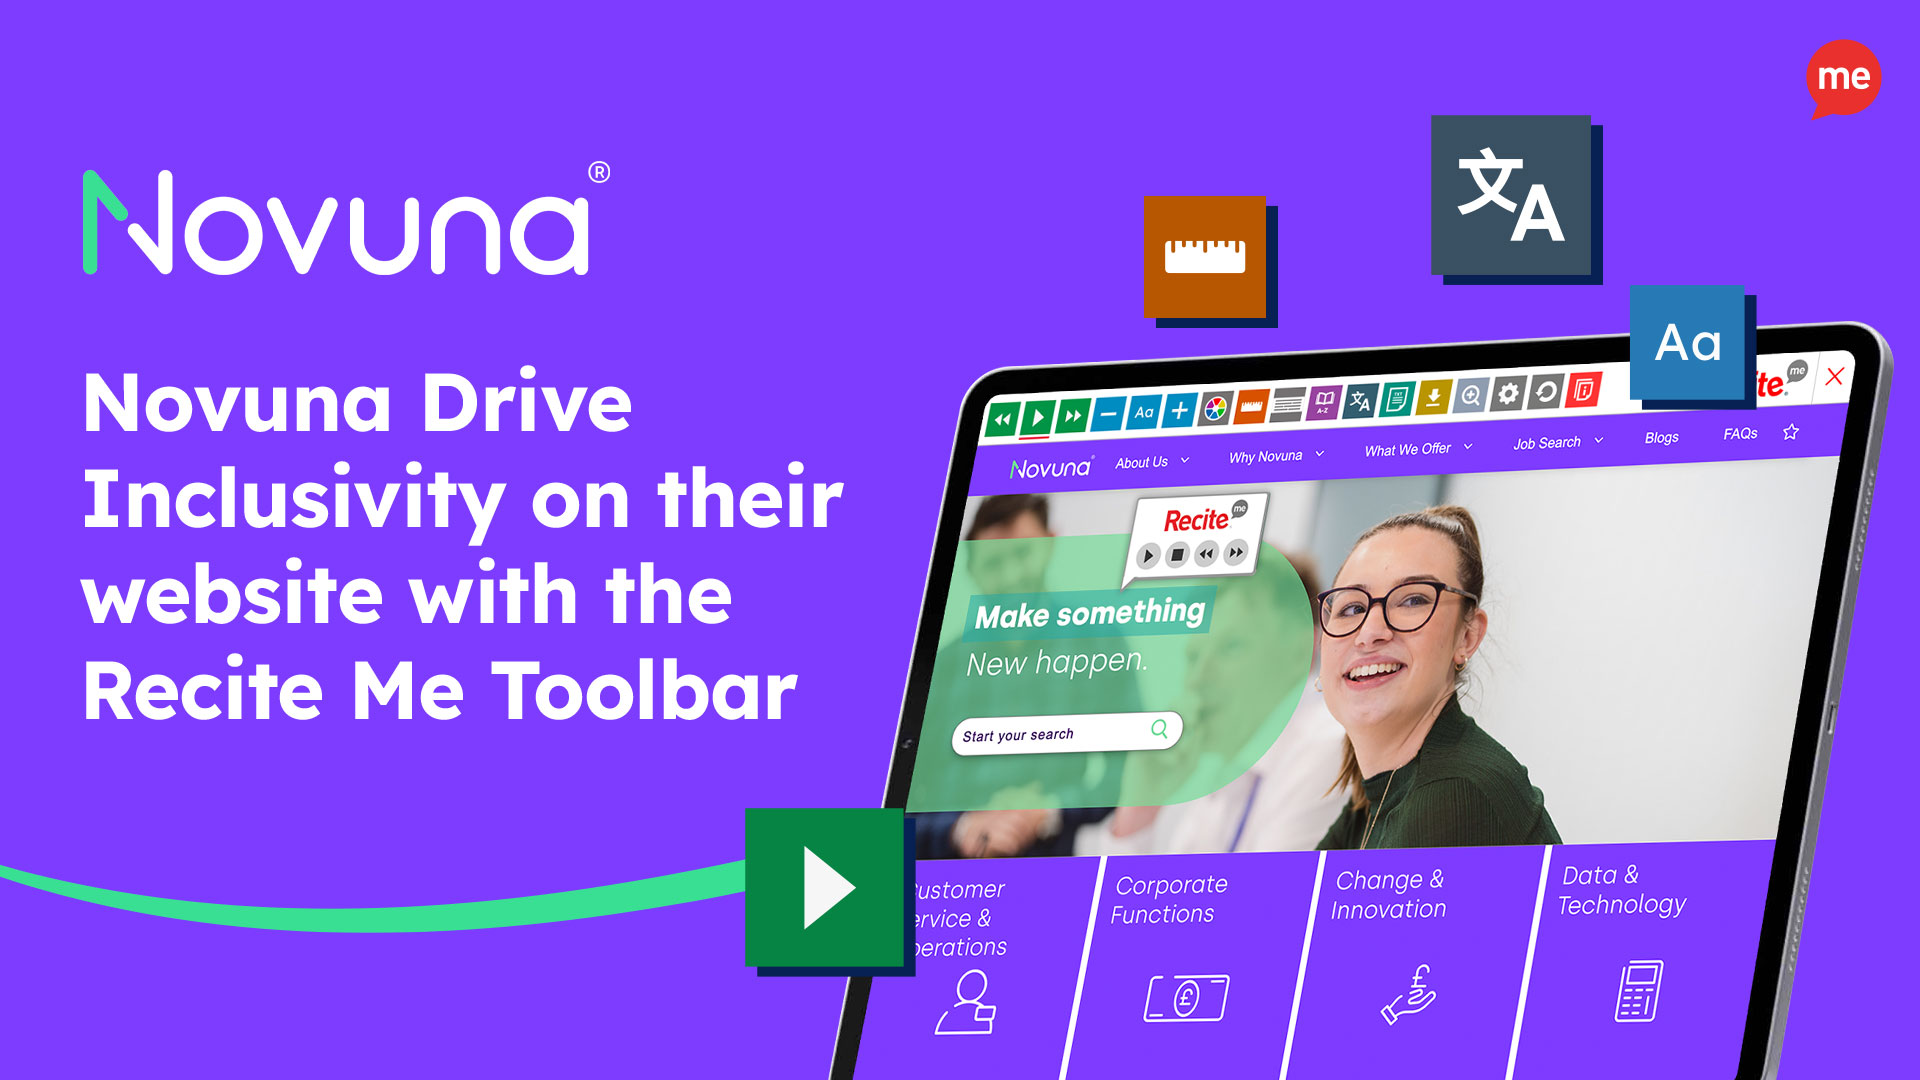 Novuna Drive Inclusivity on their website with the Recite Me Toolbar